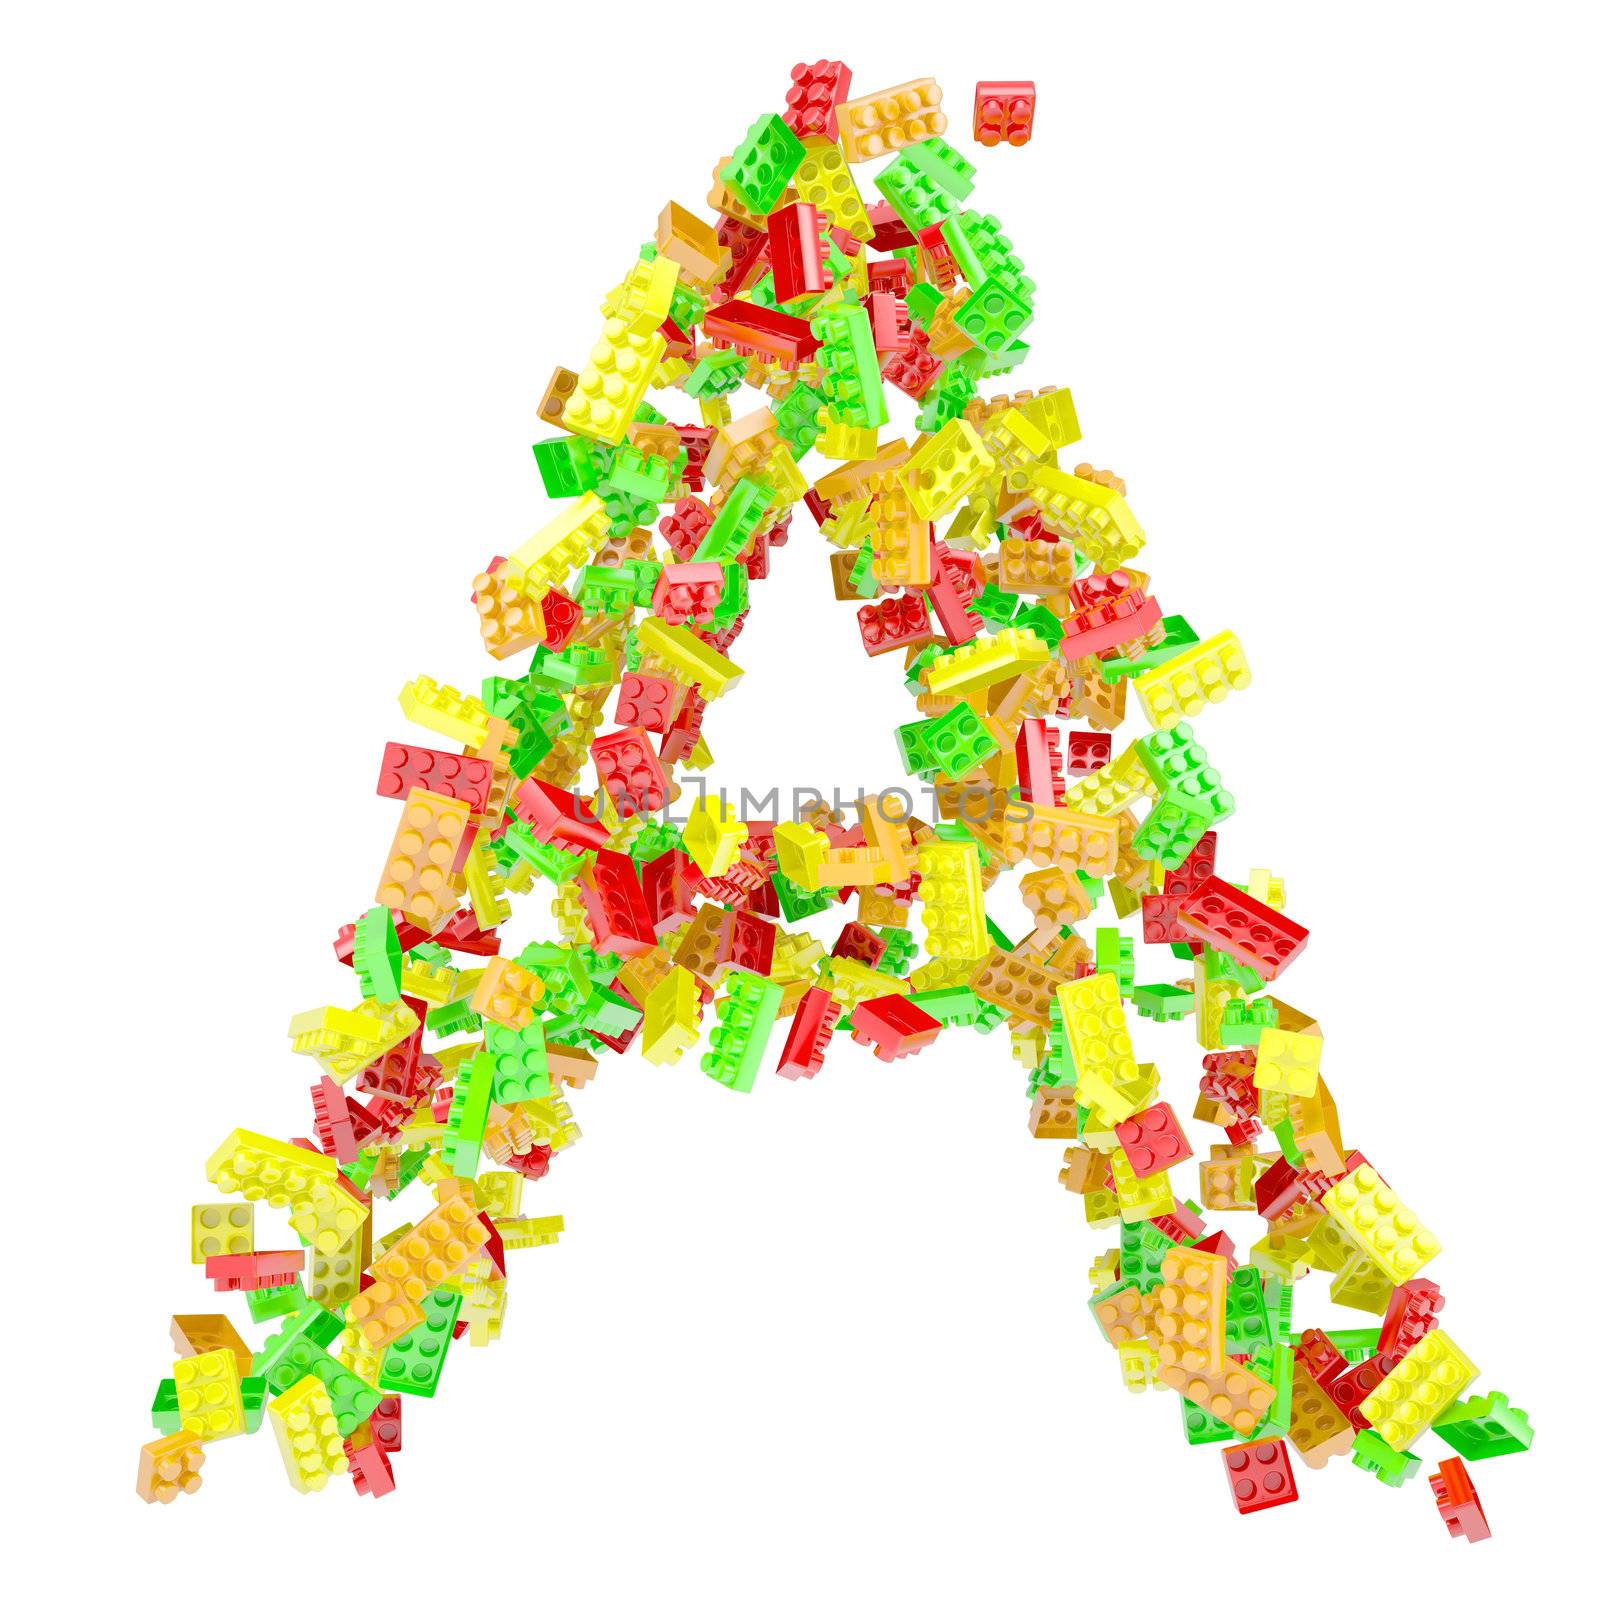 The letter A is made up of children's blocks by cherezoff